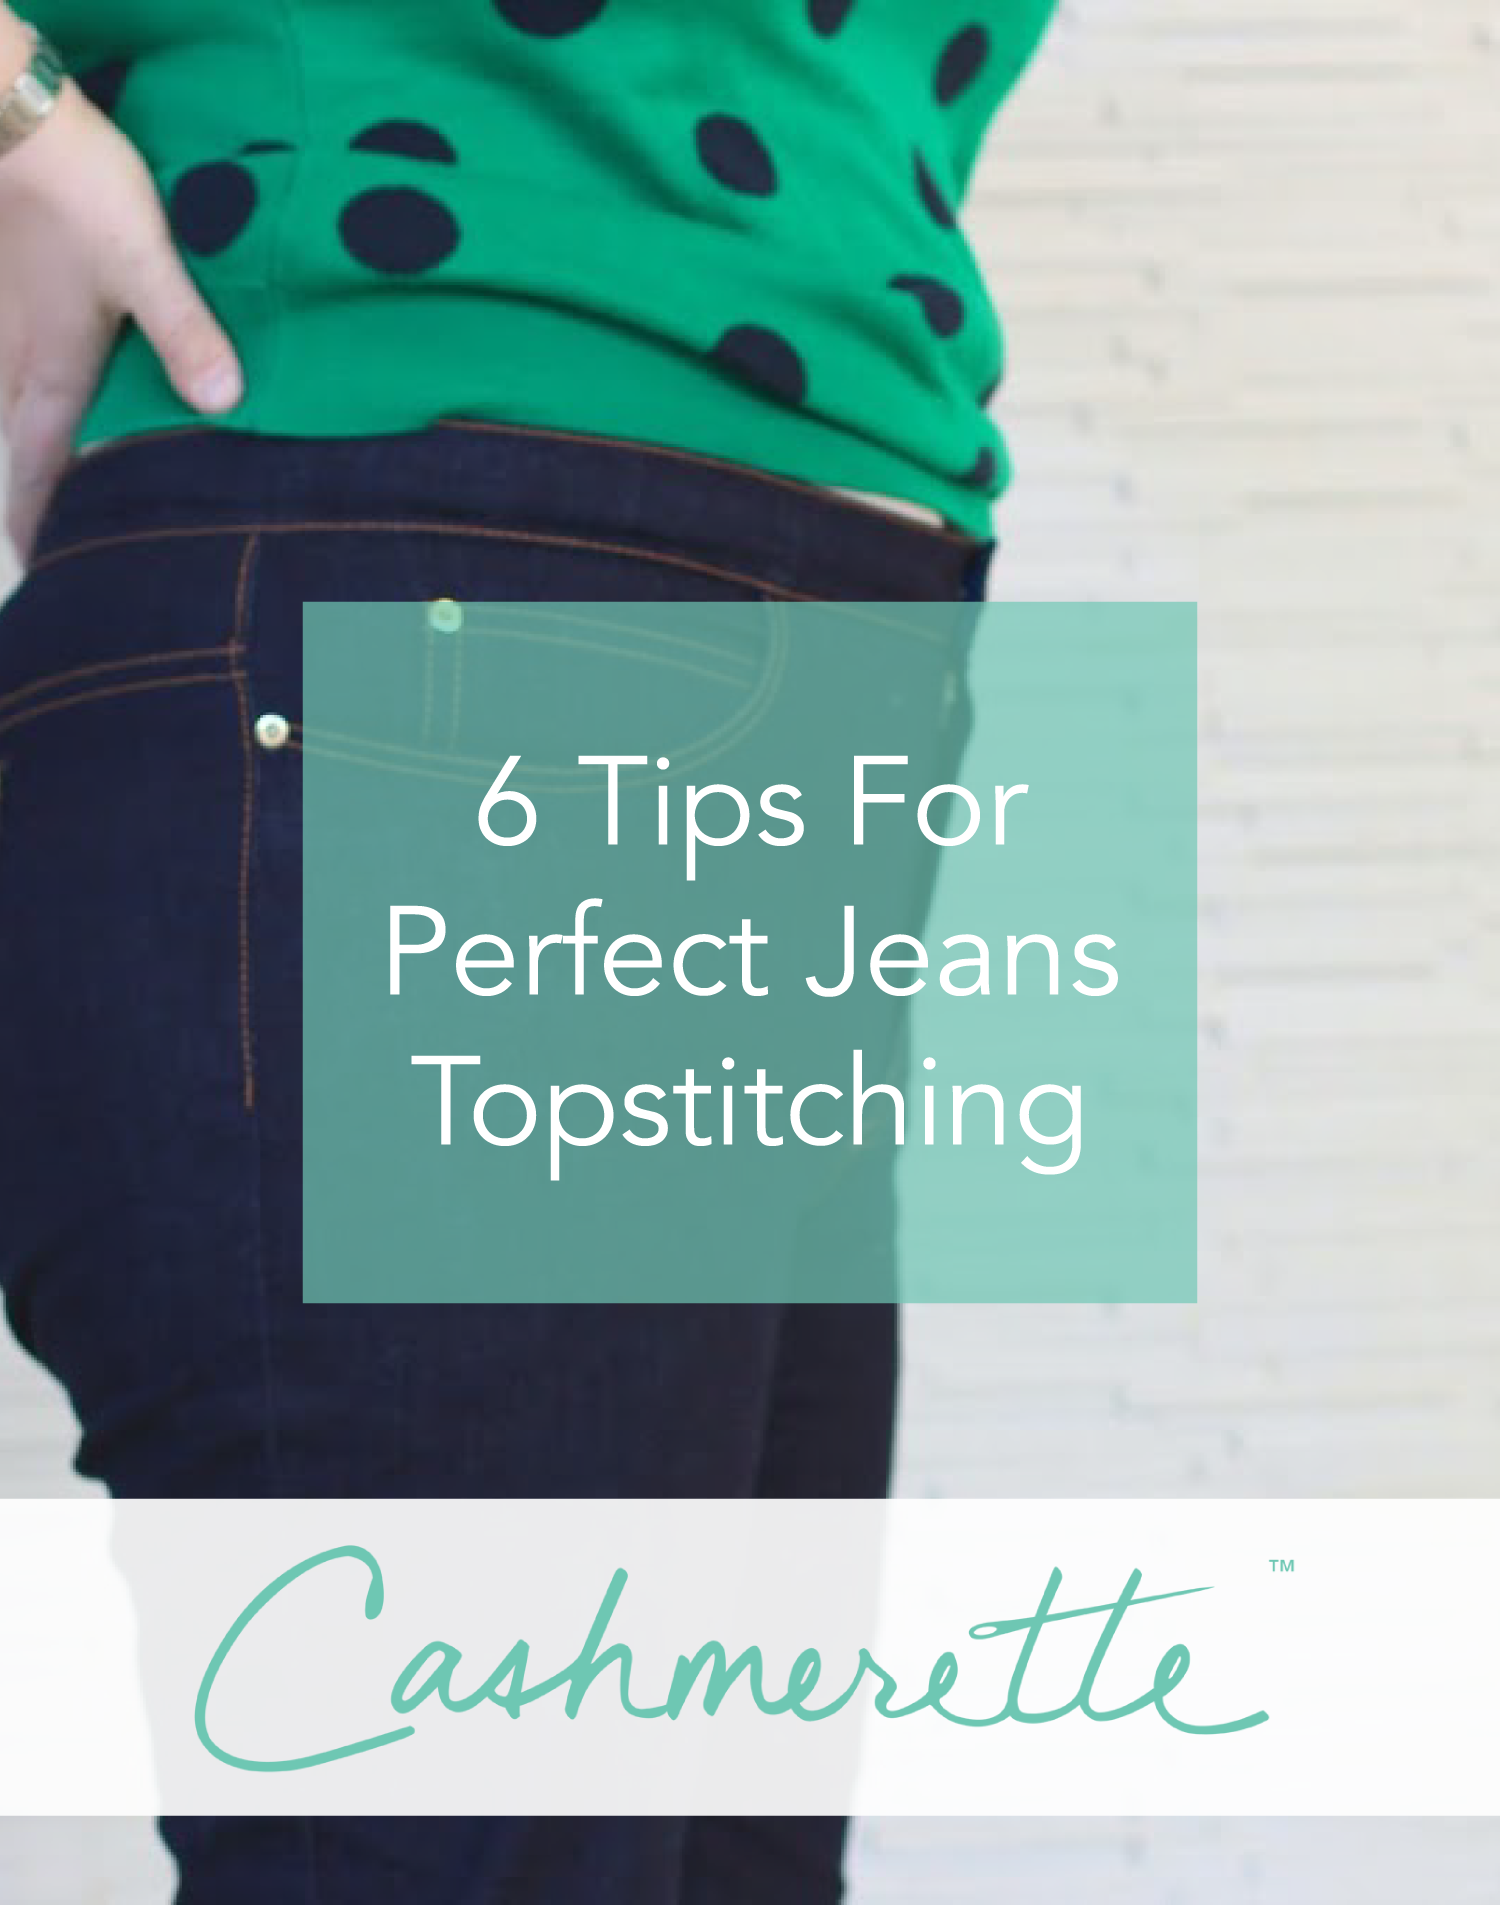 Tutorial: 6 tips for nice jeans topstitching | Cashmerette